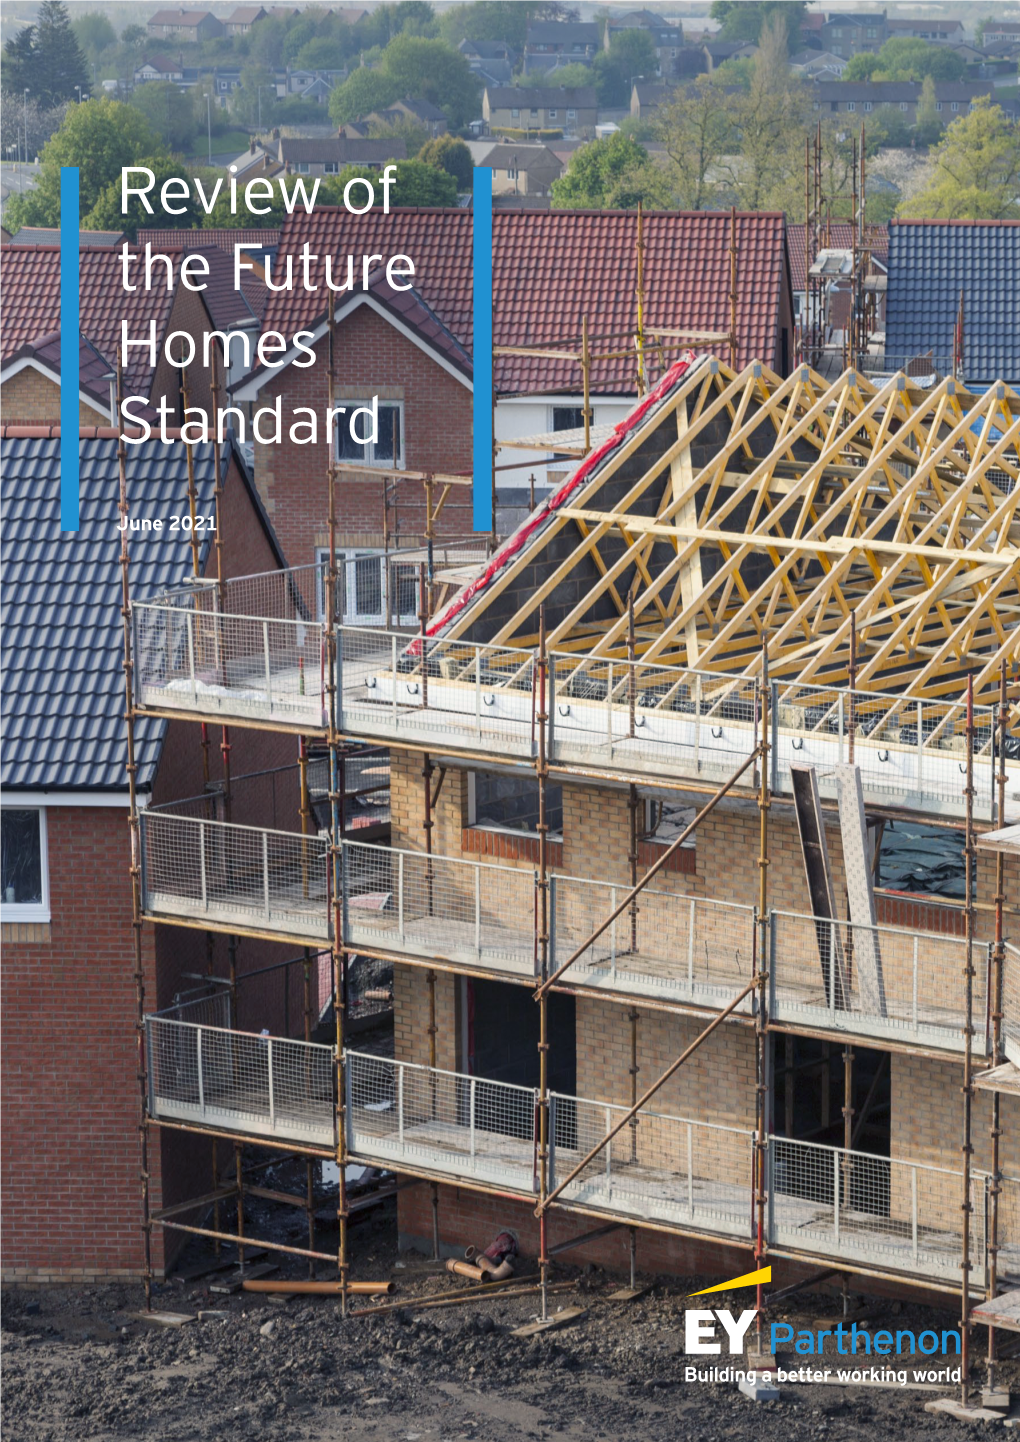 Review of the Future Homes Standard